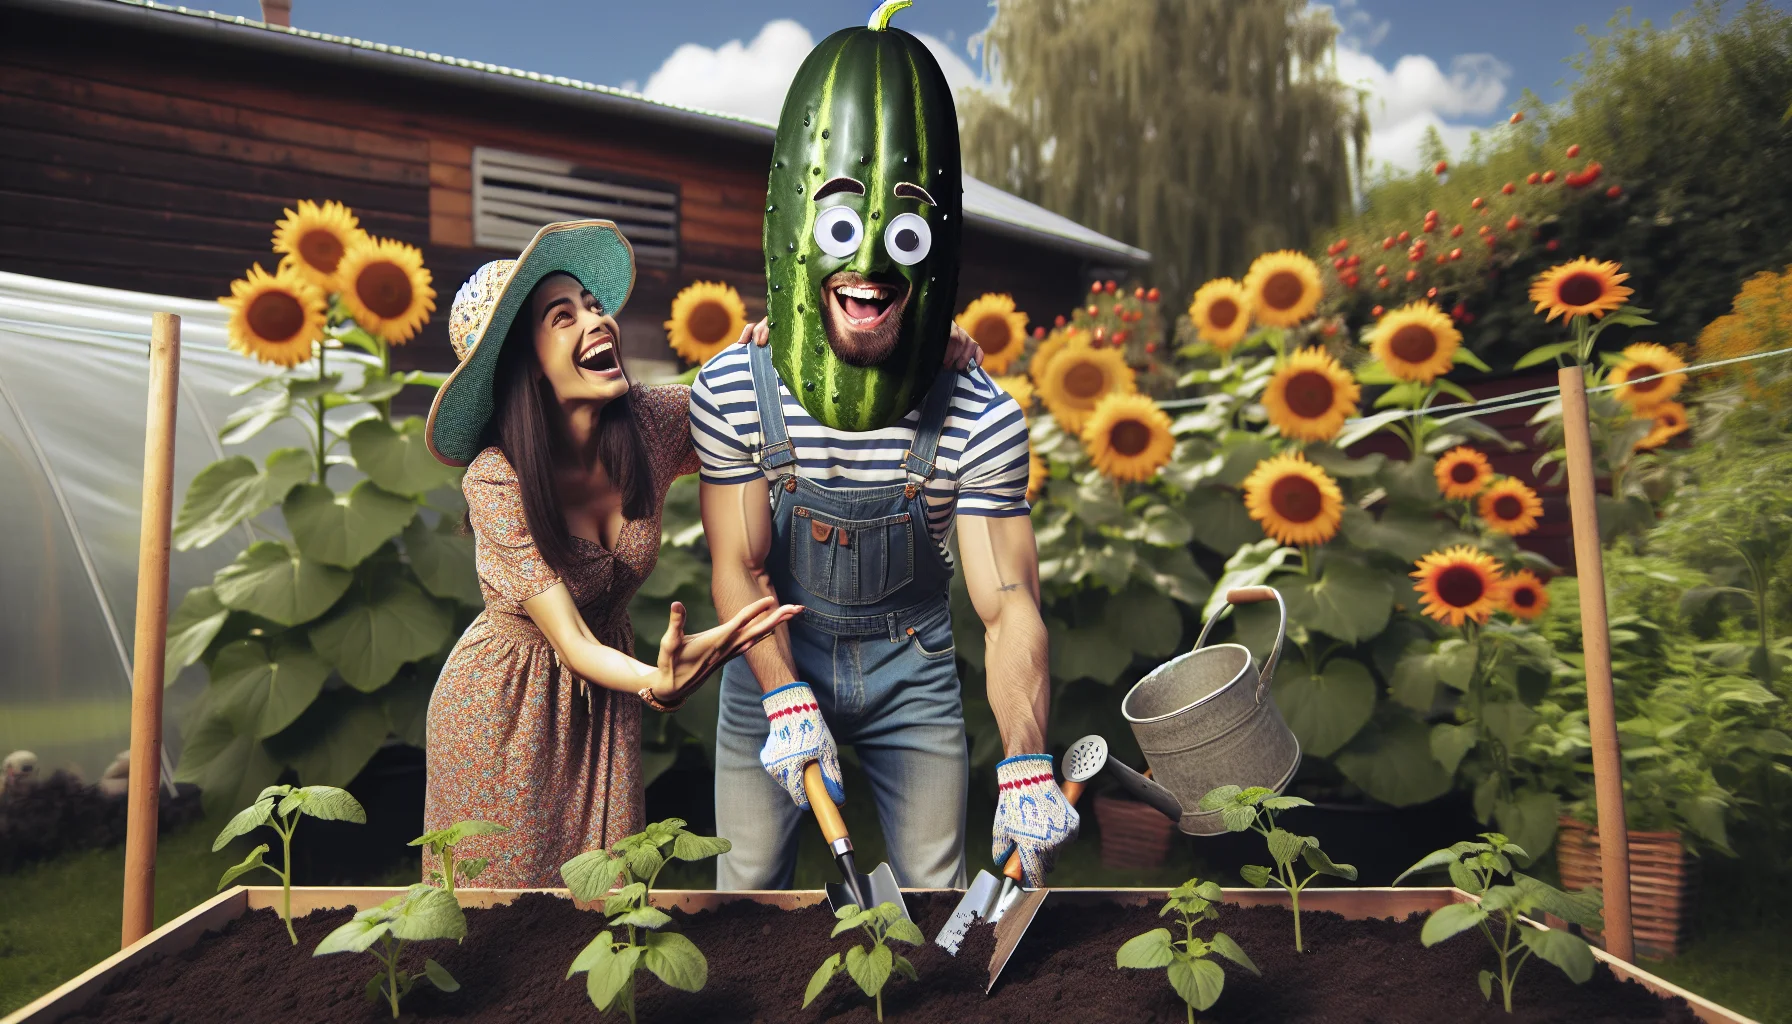 Create a humorous and realistic image that presents a gardening scenario. In this setting, a tall Caucasian male, sporting a striped shirt and denim overalls, is enthusiastically planting cucumber seeds in a garden patch purchased from a home improvement store. To add a fun element, he wears a big smile and a comical cucumber-shaped hat. He's being encouraged by a petite Middle-Eastern female neighbor wearing a floral dress and a sunhat, giggling at his unique hat while pointing at it with a wrist covered with gardening gloves. The background is filled with loads of sunflowers and tomato plants, adding more color and vibrancy to the scene. This scene is meant to entice viewers with the joy and fun of gardening activities.